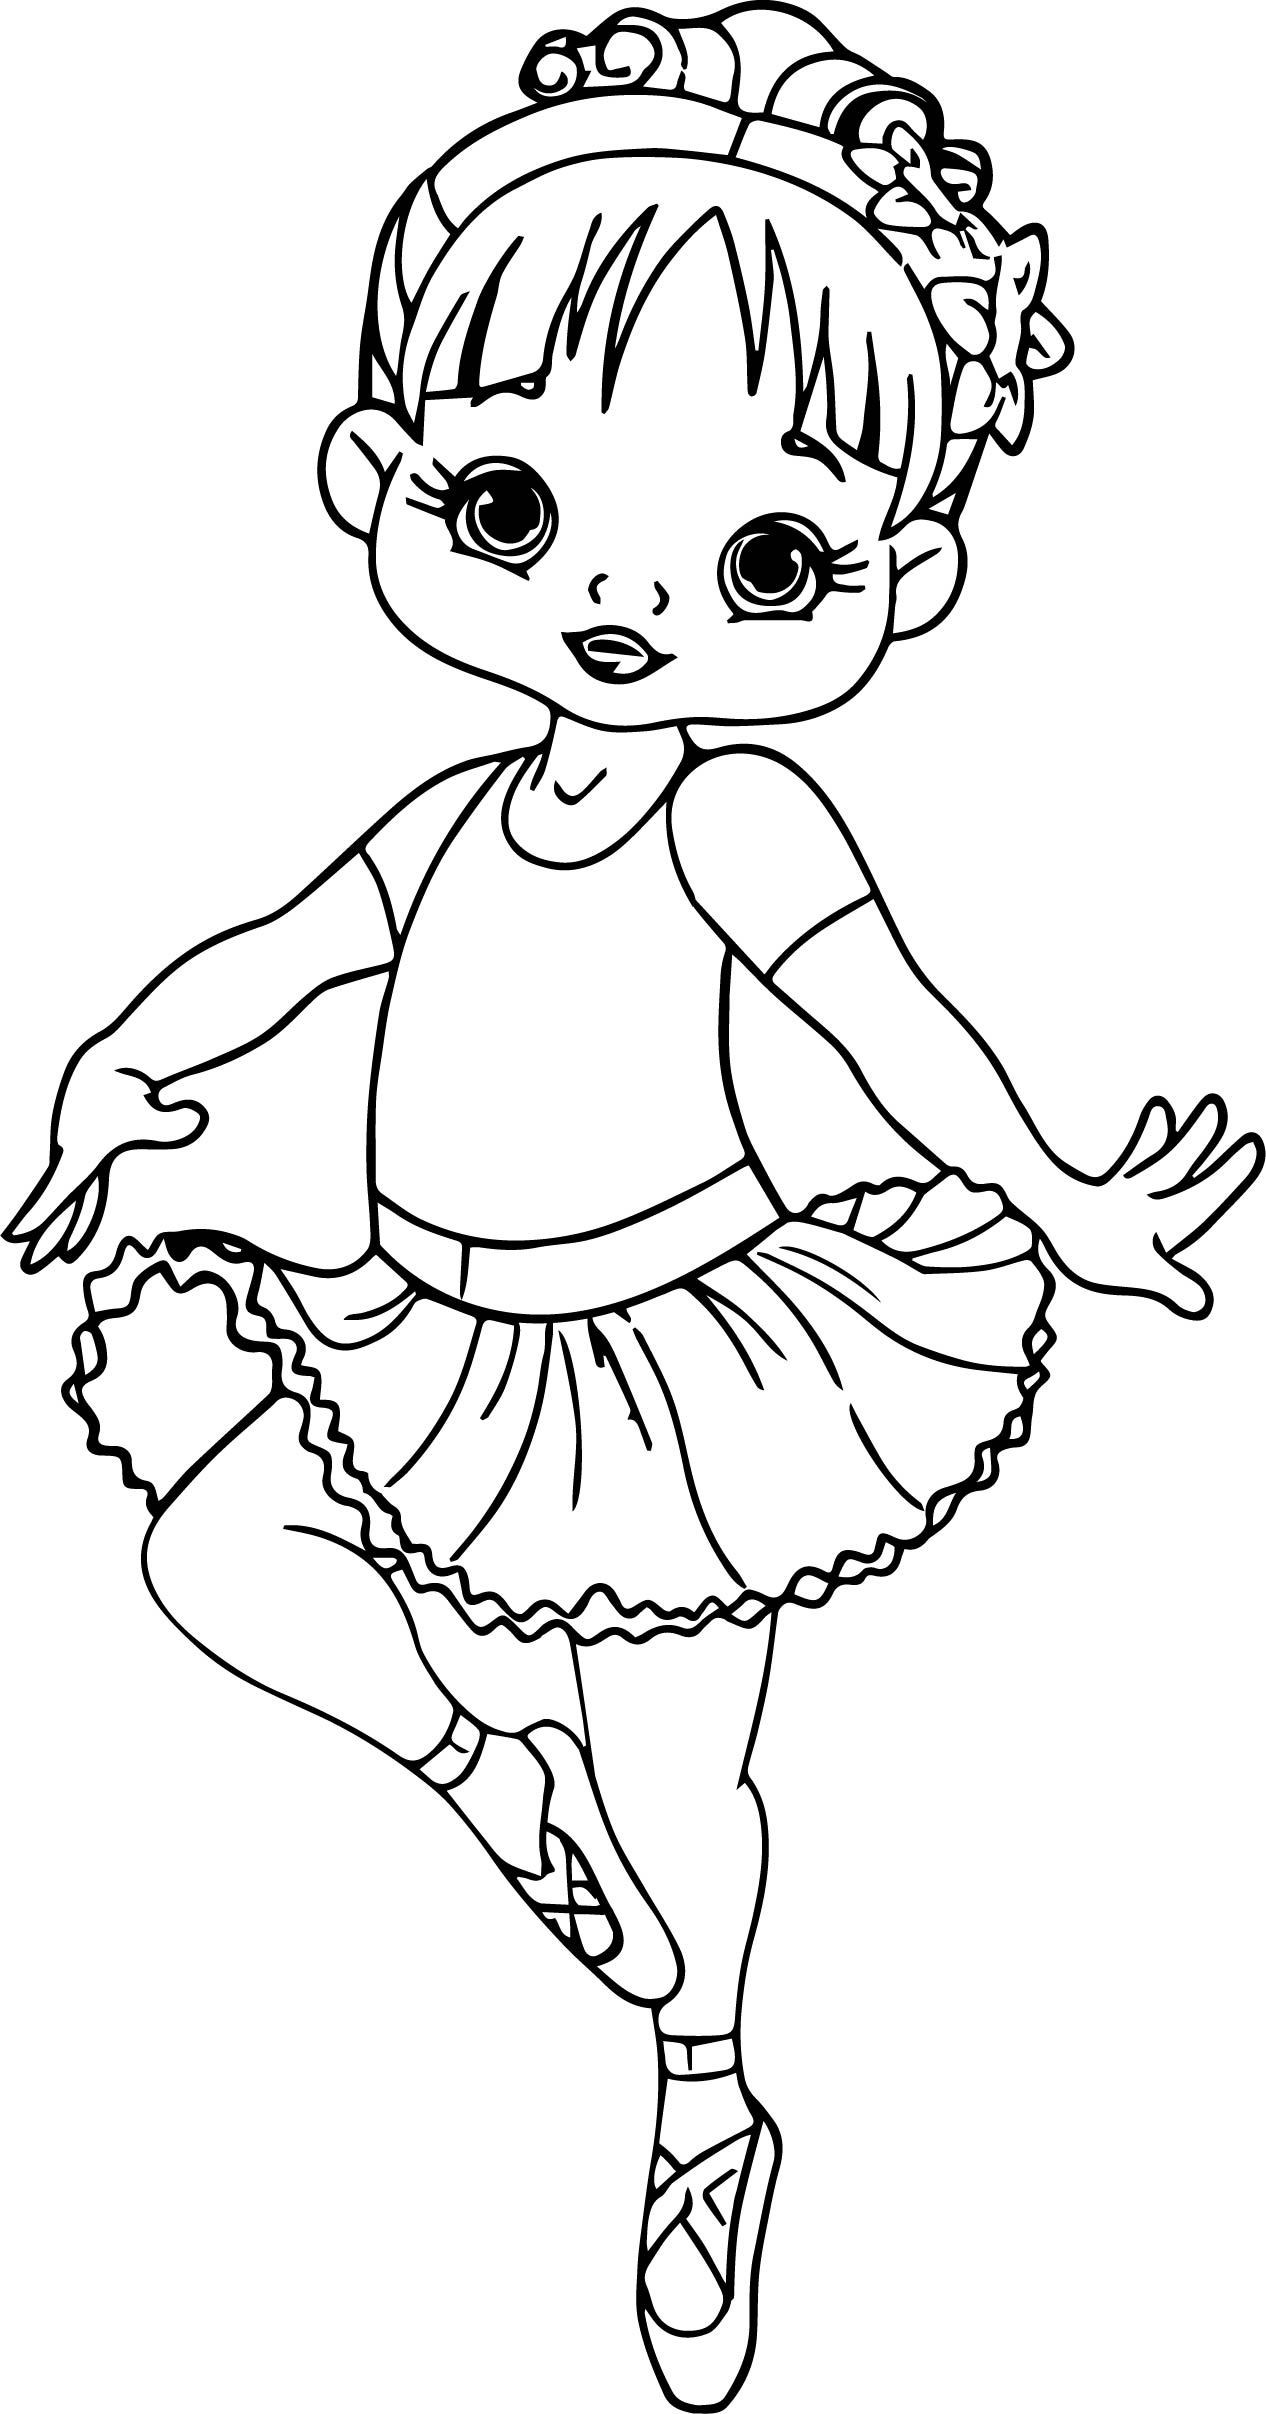 Coloring Book Pages For Girls
 Ballerina Cartoon Girl Coloring Page